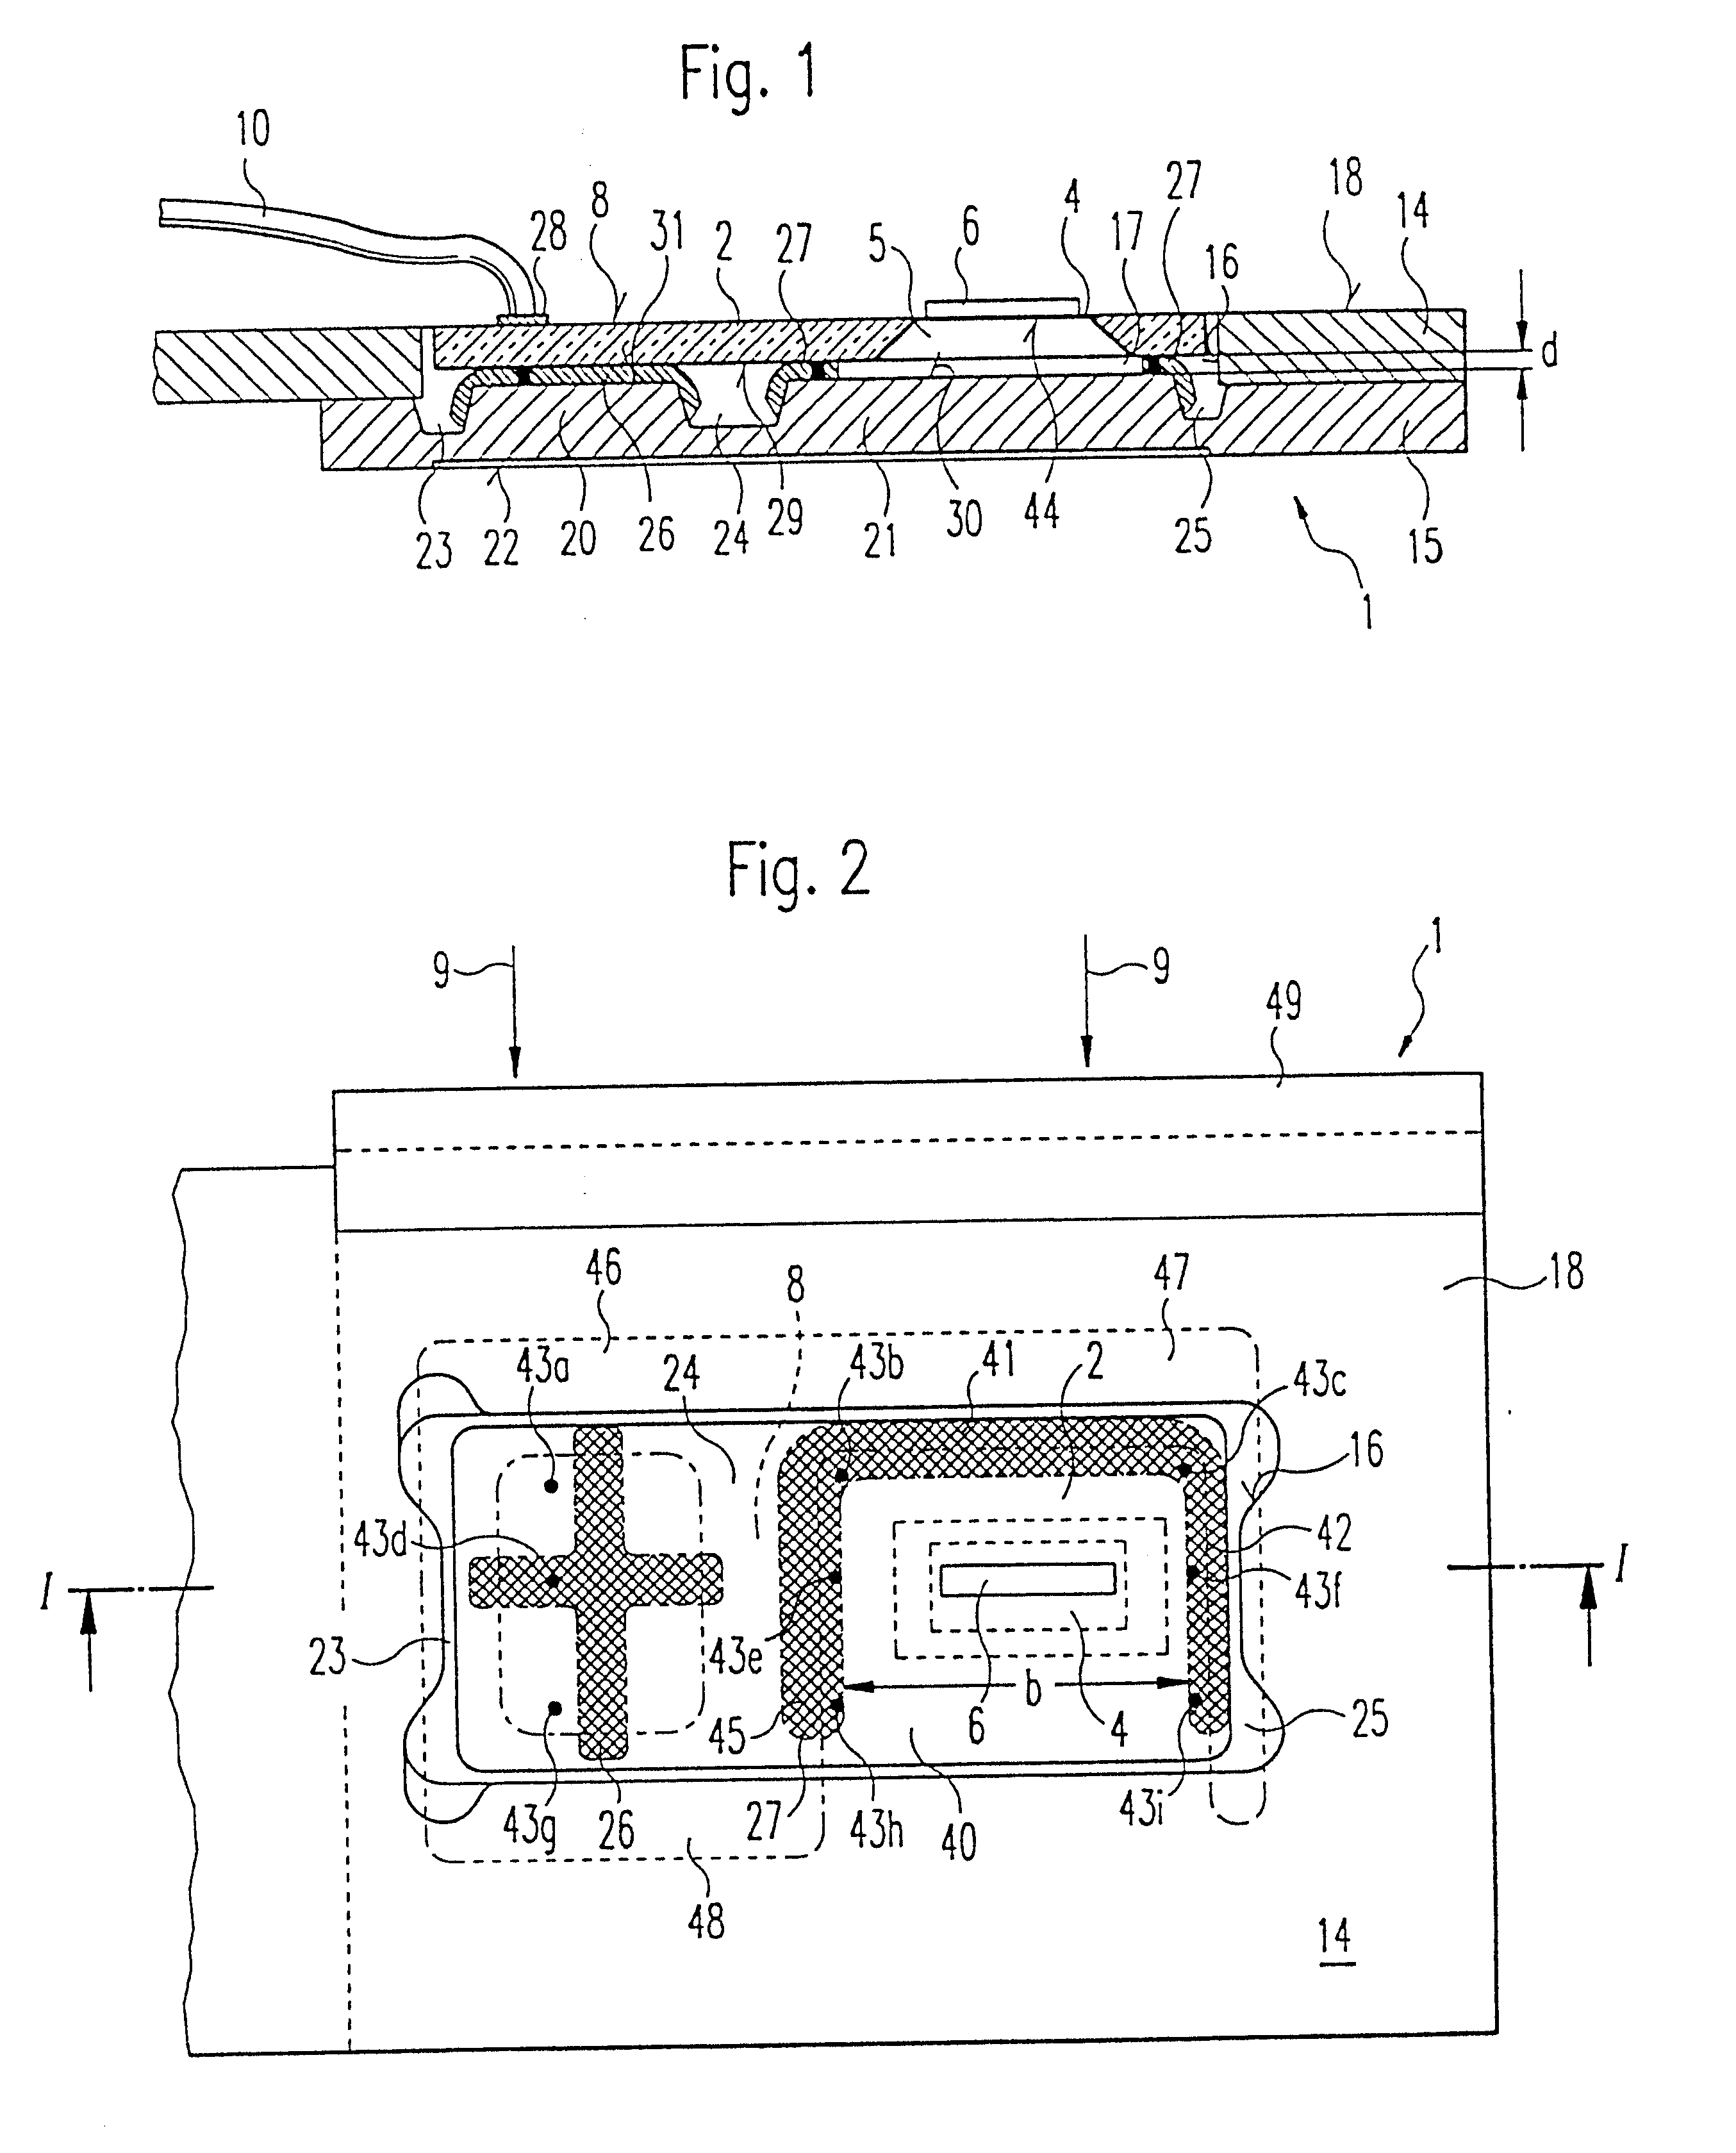 Measurement device for measuring the mass of a flowing medium